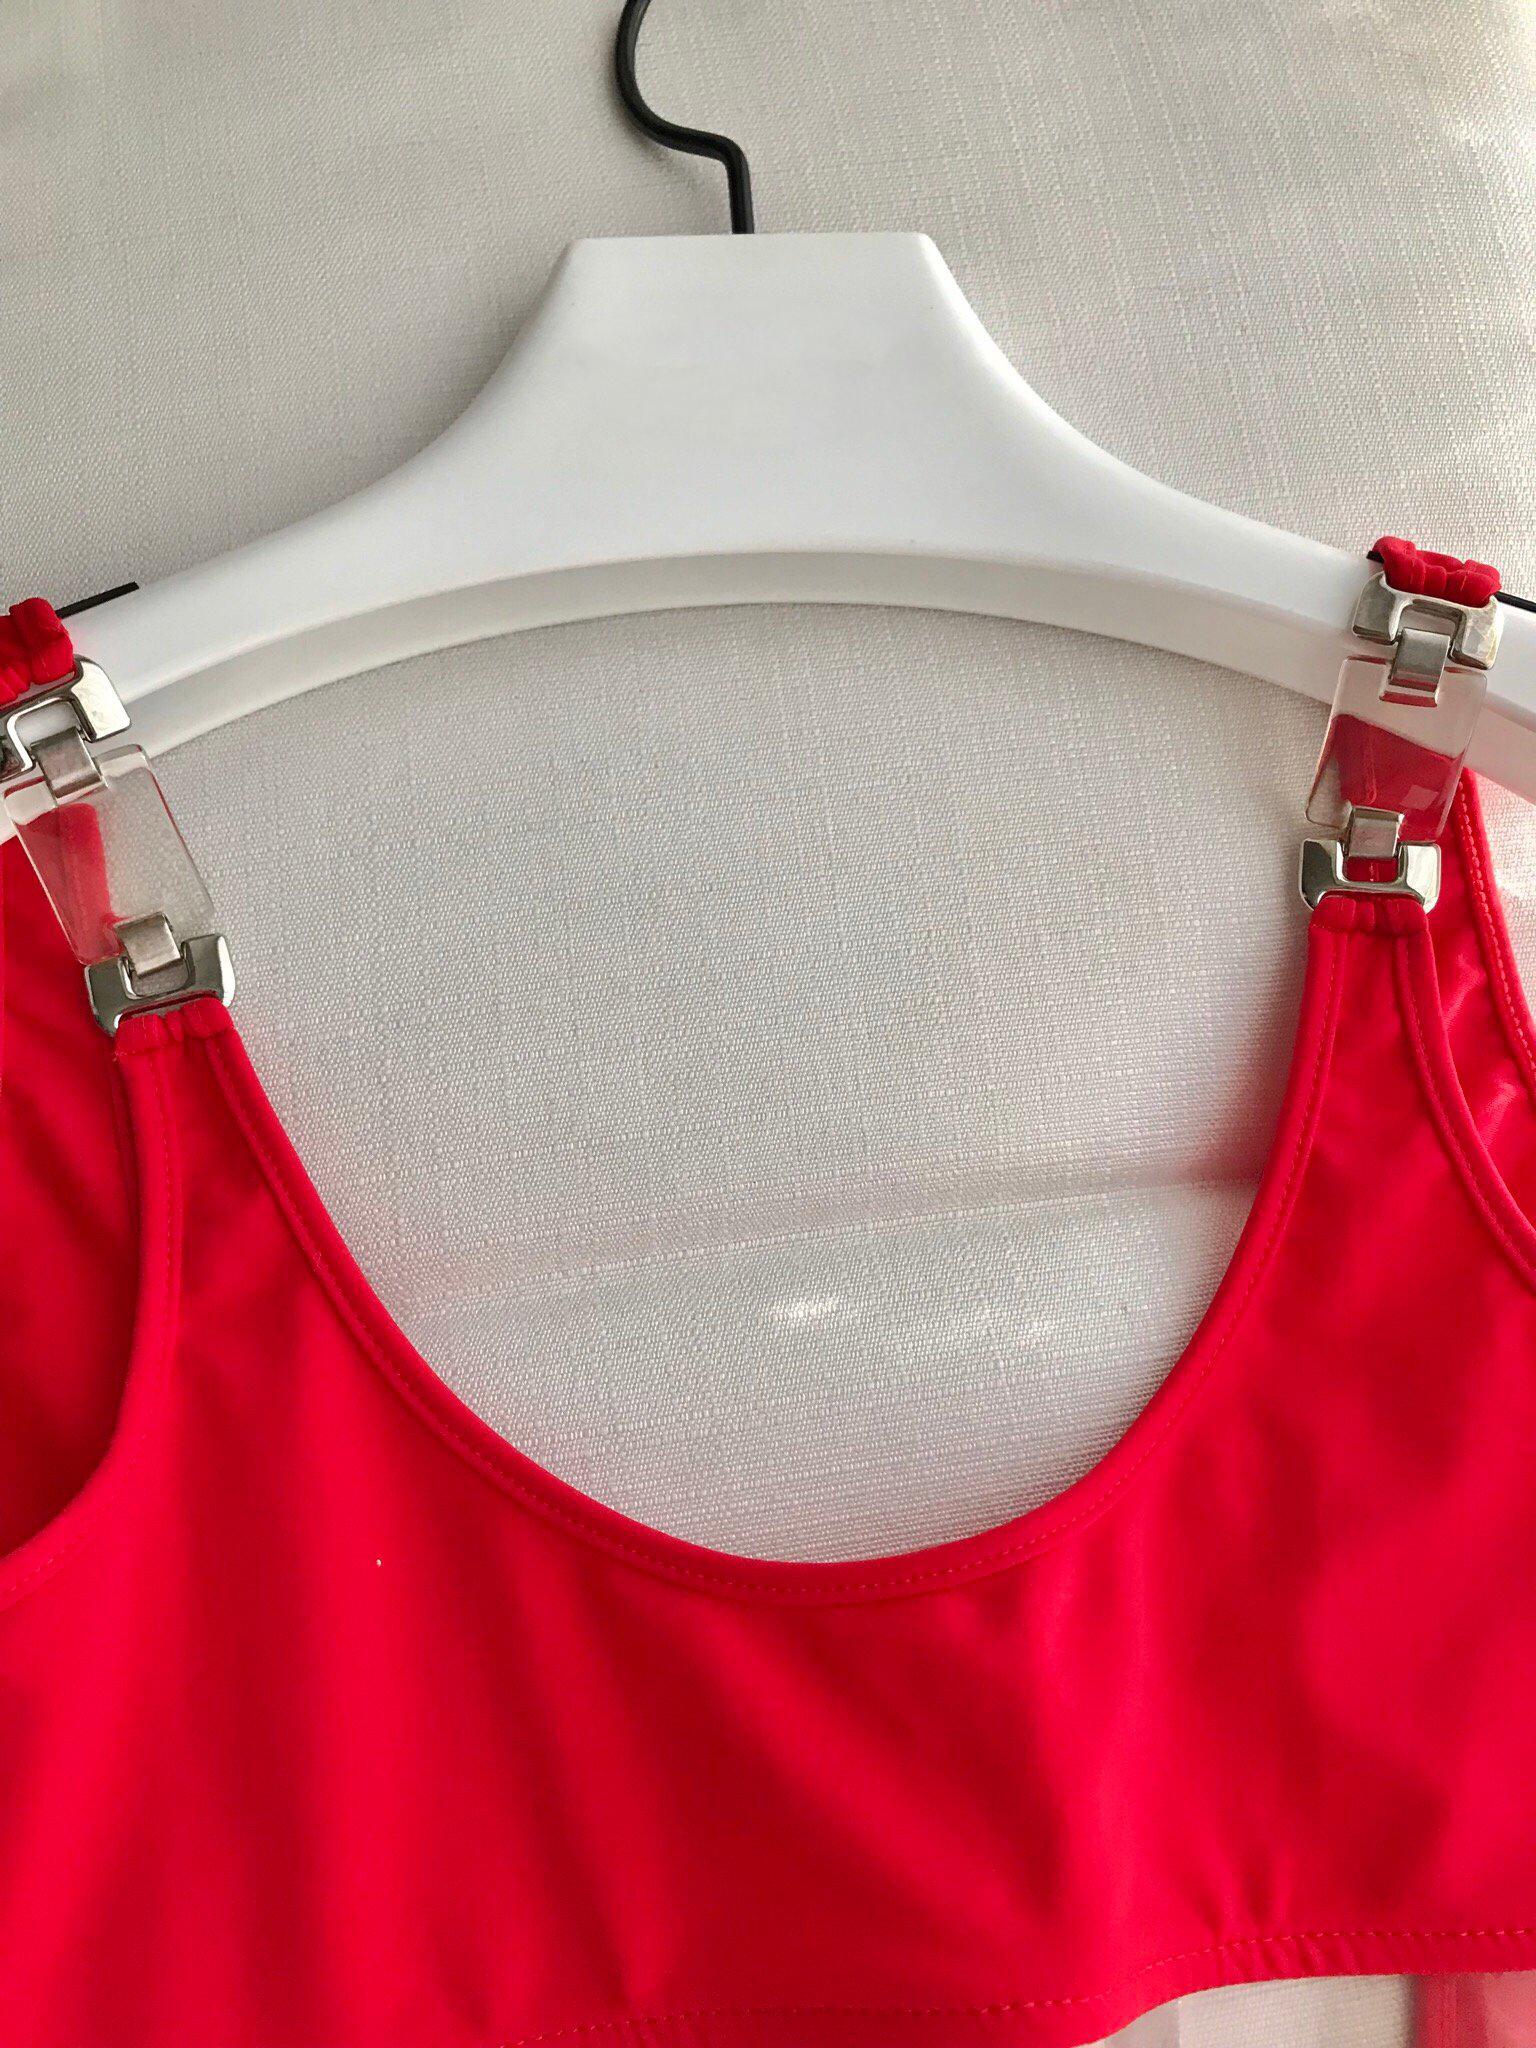 Paco Rabanne Red One Piece Bathing suit 2